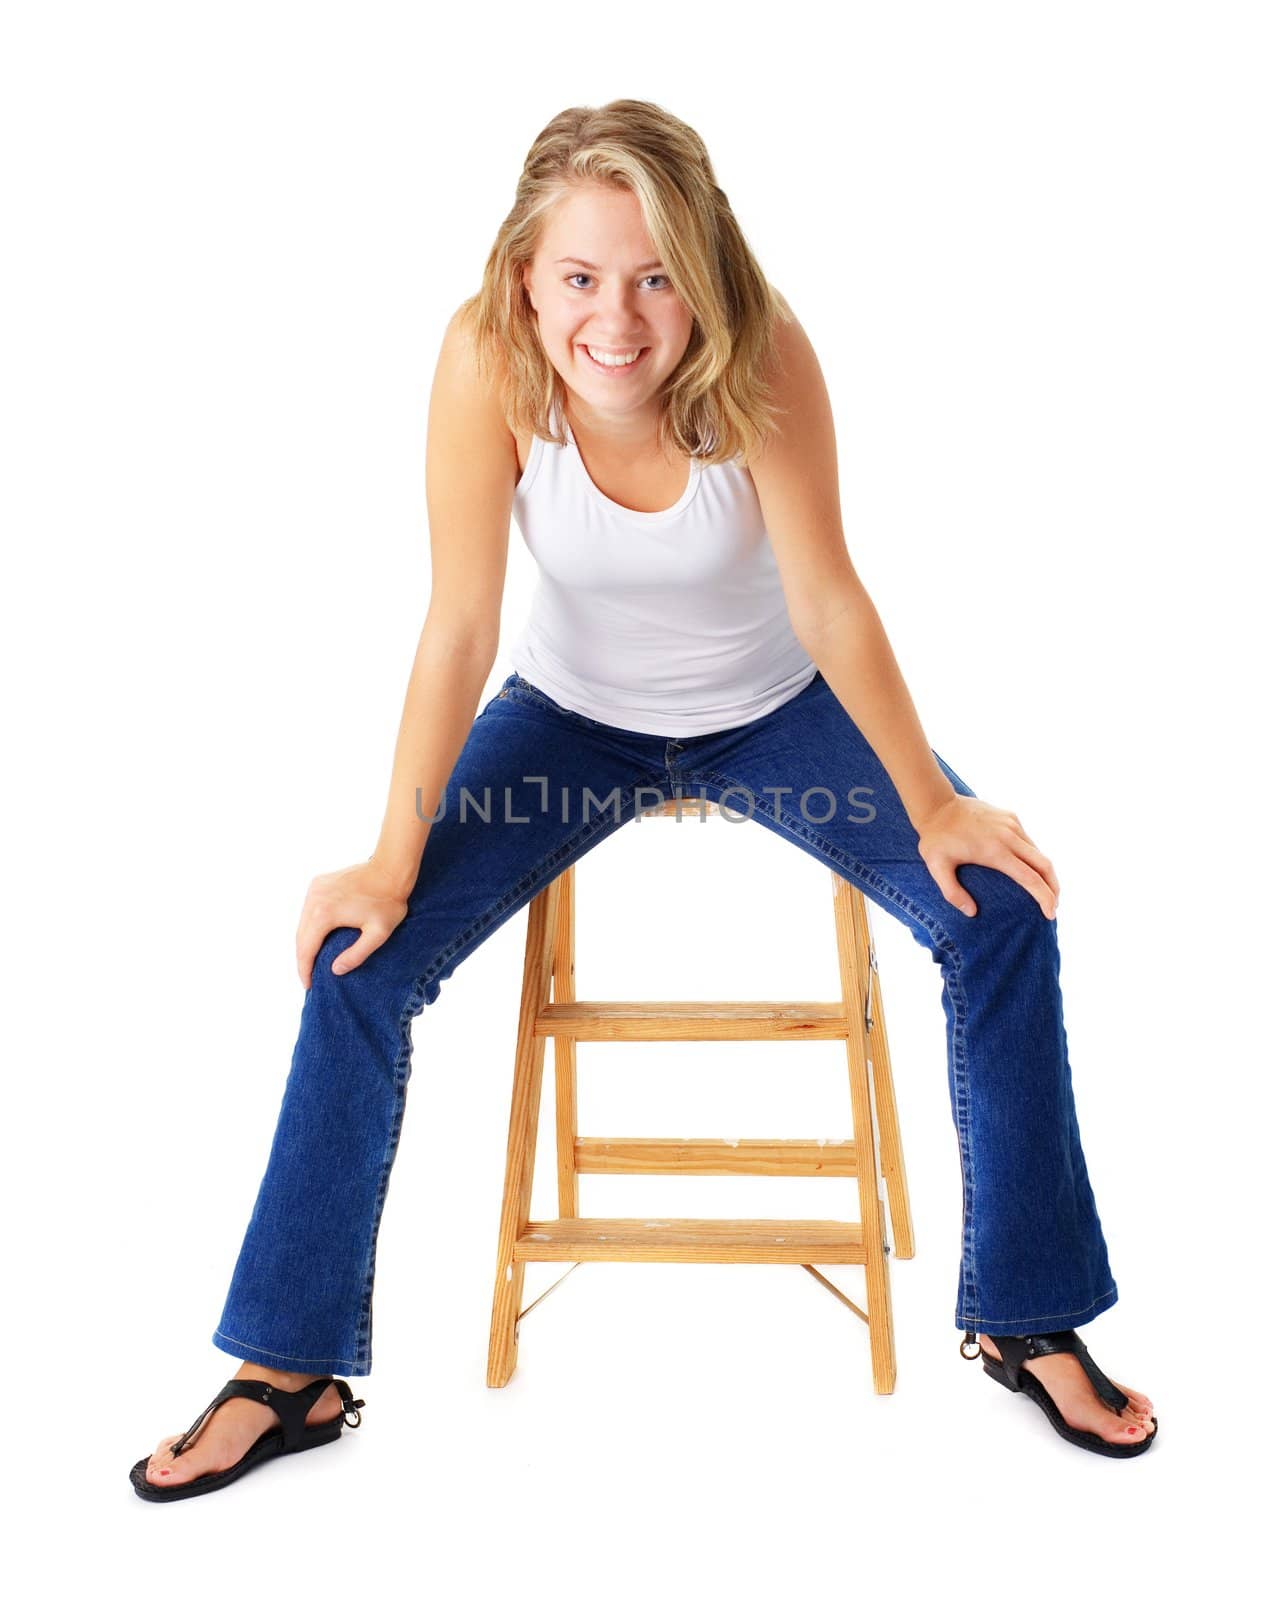 Casual Woman Sitting On A Small Ladder by cardmaverick